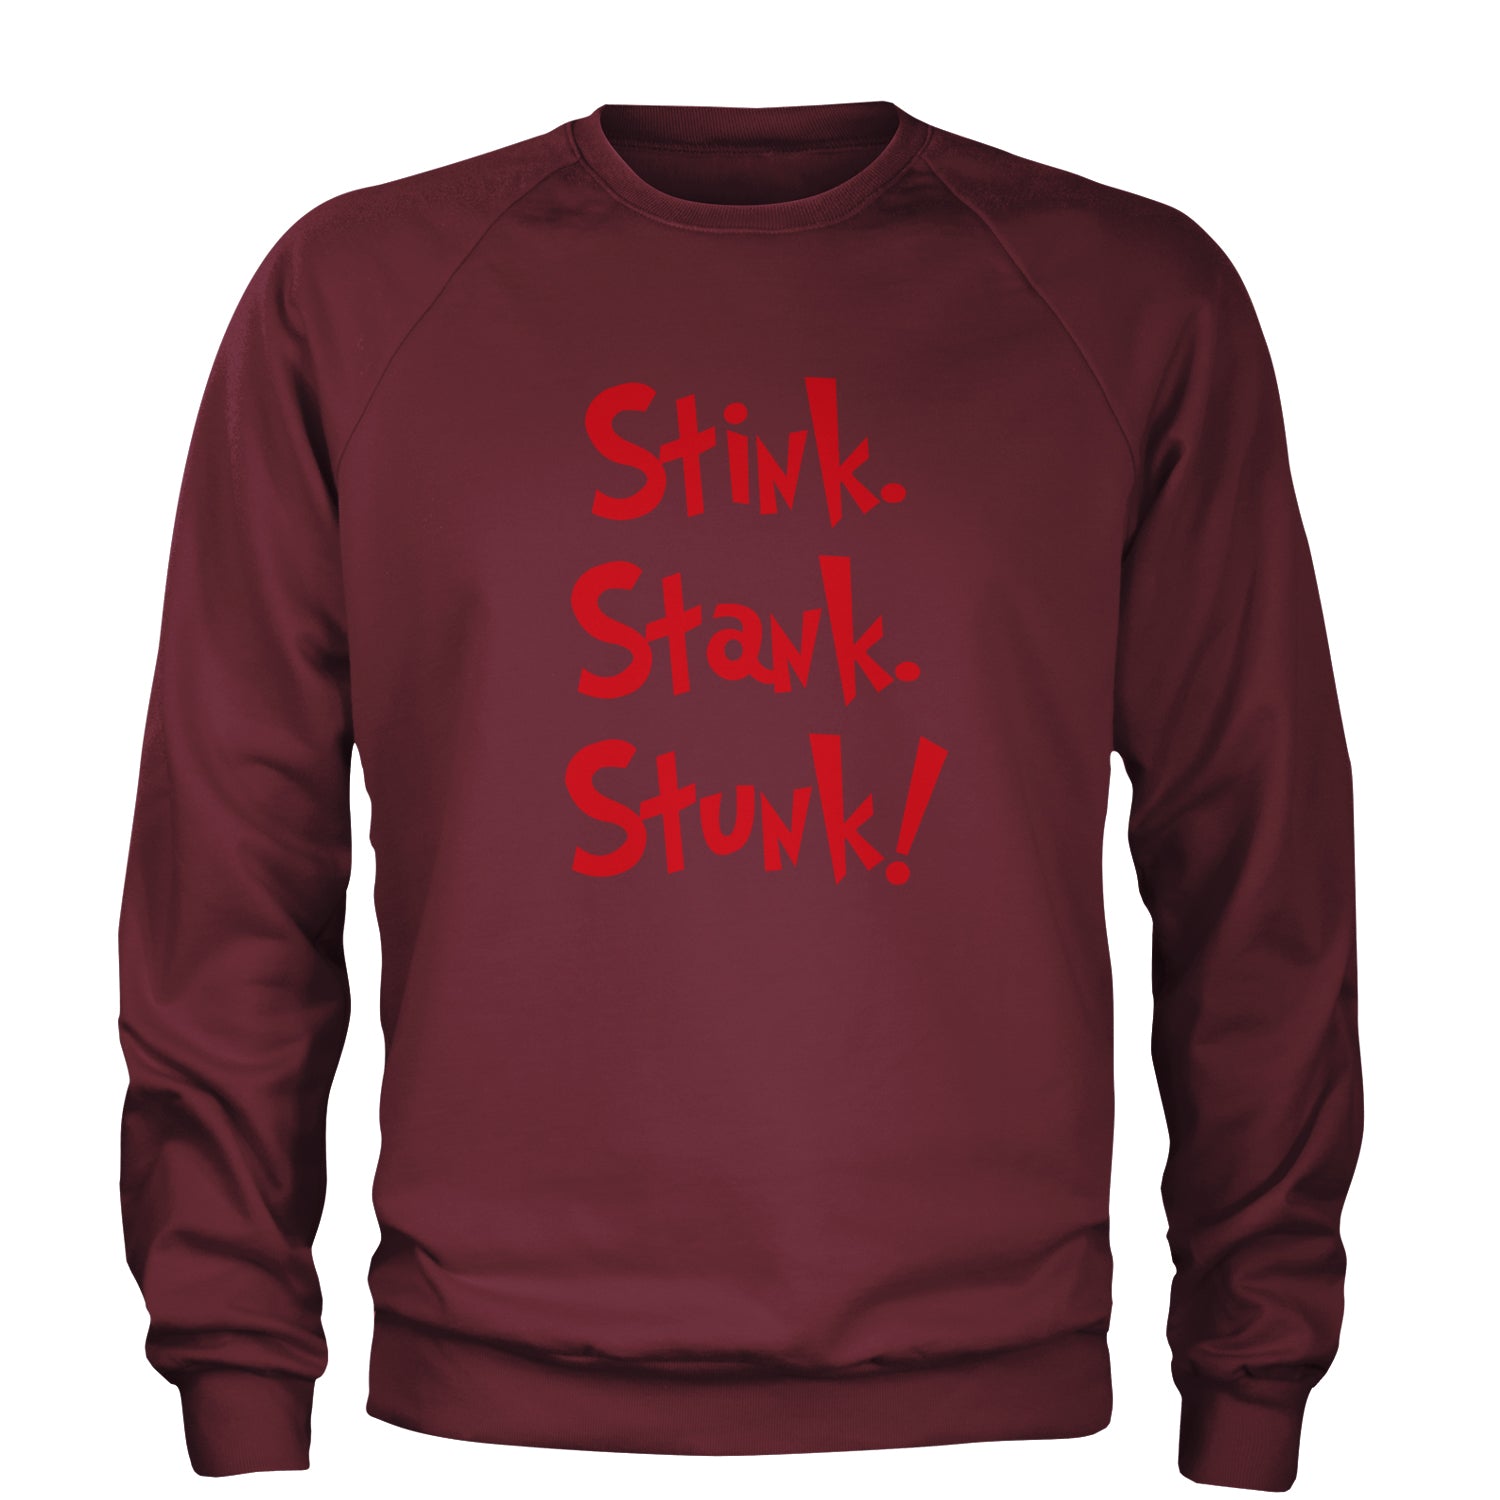 Stink Stank Stunk Grinch Adult Crewneck Sweatshirt christmas, holiday, sweater, ugly, xmas by Expression Tees